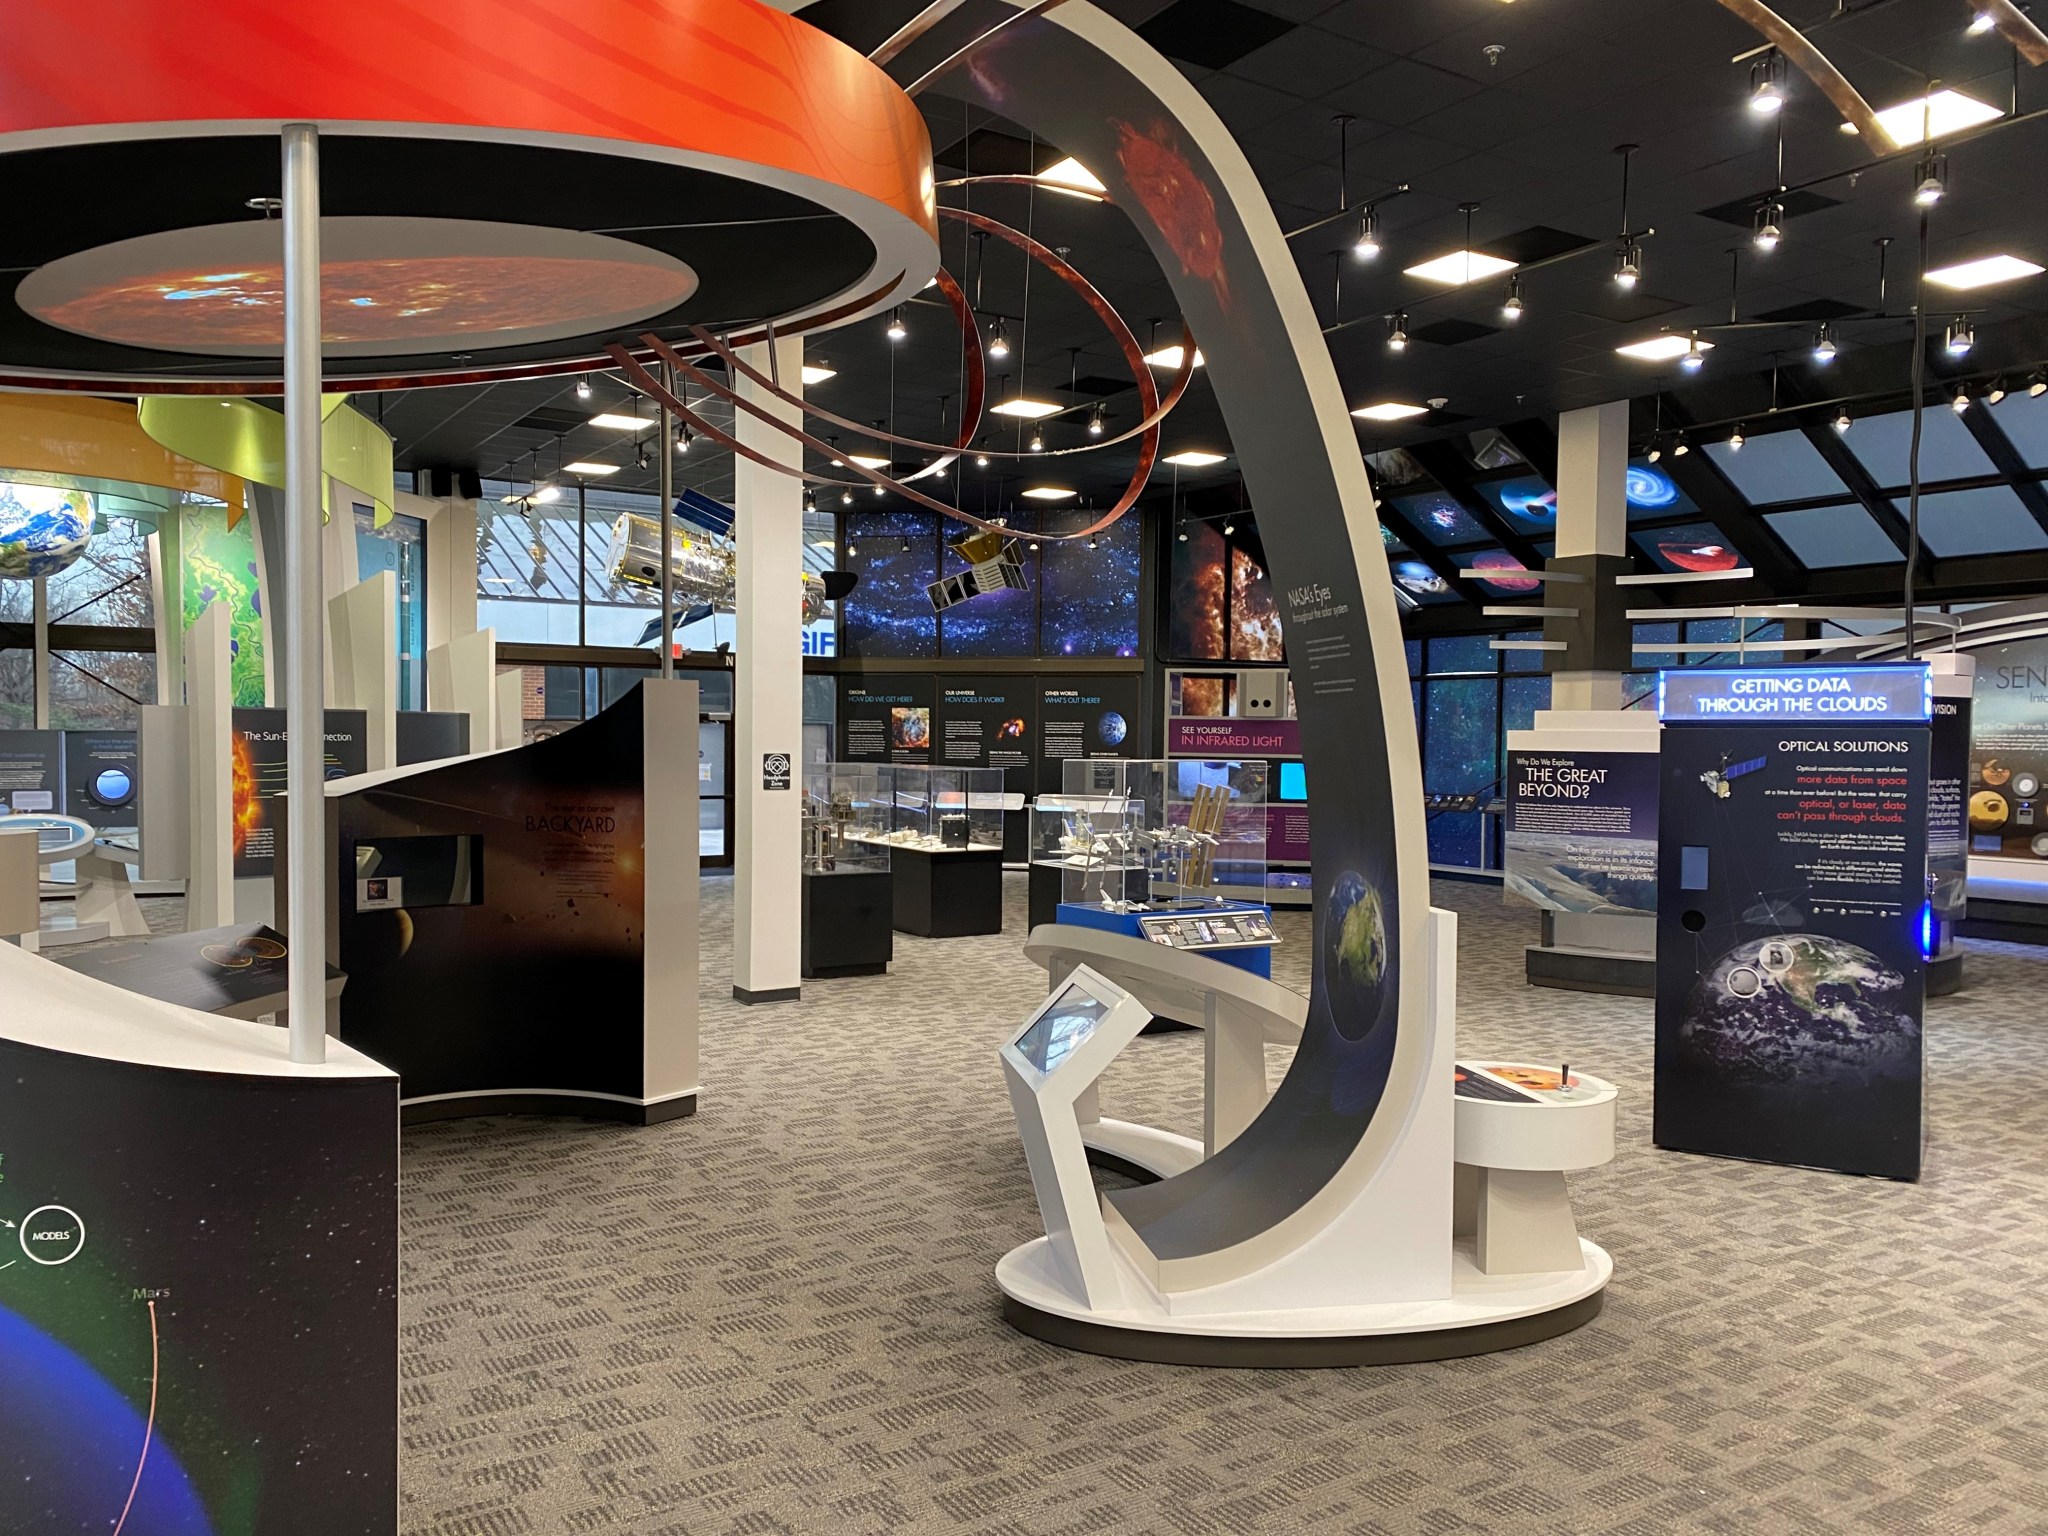 A museum exhibit with colorful signs and displays in shades of blue, purple, and black. In the foreground, a stylized model of the solar system features a flat, red circle mounted horizontally near the ceiling, with graceful arched supports containing text about the Earth and Sun, and shiny red loops curving out from the Sun's red circle.